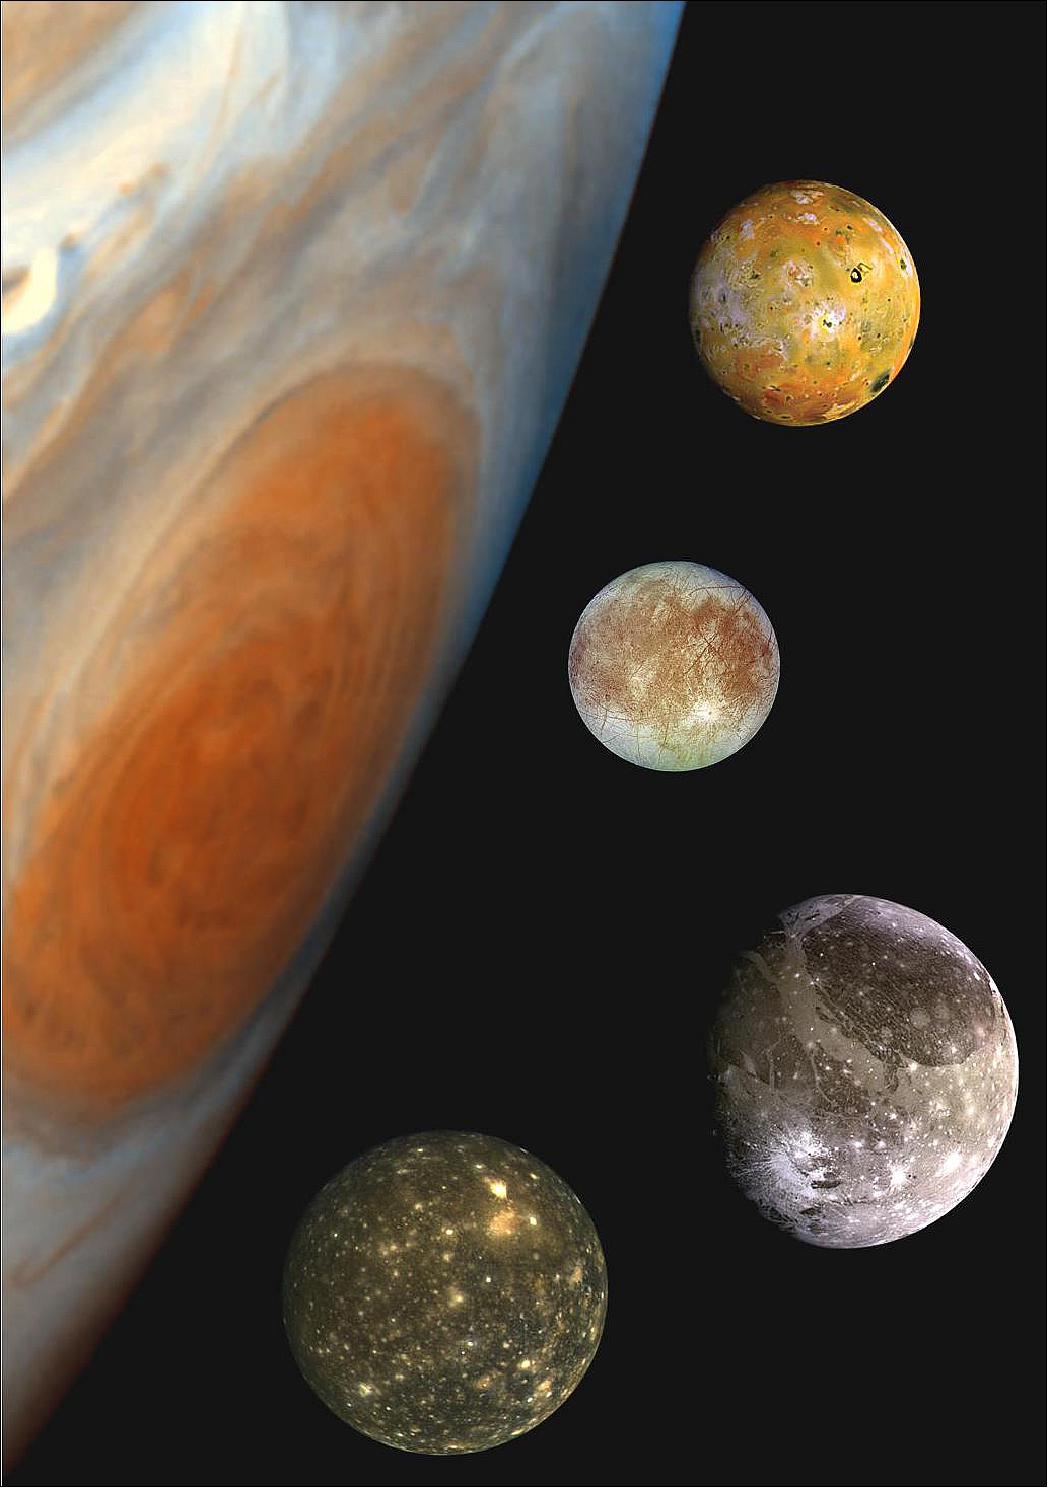 Figure 6: Jupiter's largest moons. This 'family portrait' shows a composite of images of Jupiter, including it's Great Red Spot, and its four largest moons. From top to bottom, the moons are Io, Europa, Ganymede and Callisto. Europa is almost the same size as Earth's moon, while Ganymede, the largest moon in the Solar System, is larger than planet Mercury. - While Io is a volcanically active world, Europa, Ganymede and Callisto are icy, and may have oceans of liquid water under their crusts. Europa in particular may even harbor a habitable environment. Jupiter and its large icy moons will provide a key focus for ESA's Juice mission. The spacecraft will tour the Jovian system for about three-and-a-half years, including flybys of the moons. It will also enter orbit around Ganymede, the first time any moon beyond our own has been orbited by a spacecraft. The images of Jupiter, Io, Europa and Ganymede were taken by NASA's Galileo probe in 1996, while the Callisto image is from the 1979 flyby of Voyager (image via NASA Photojournal)